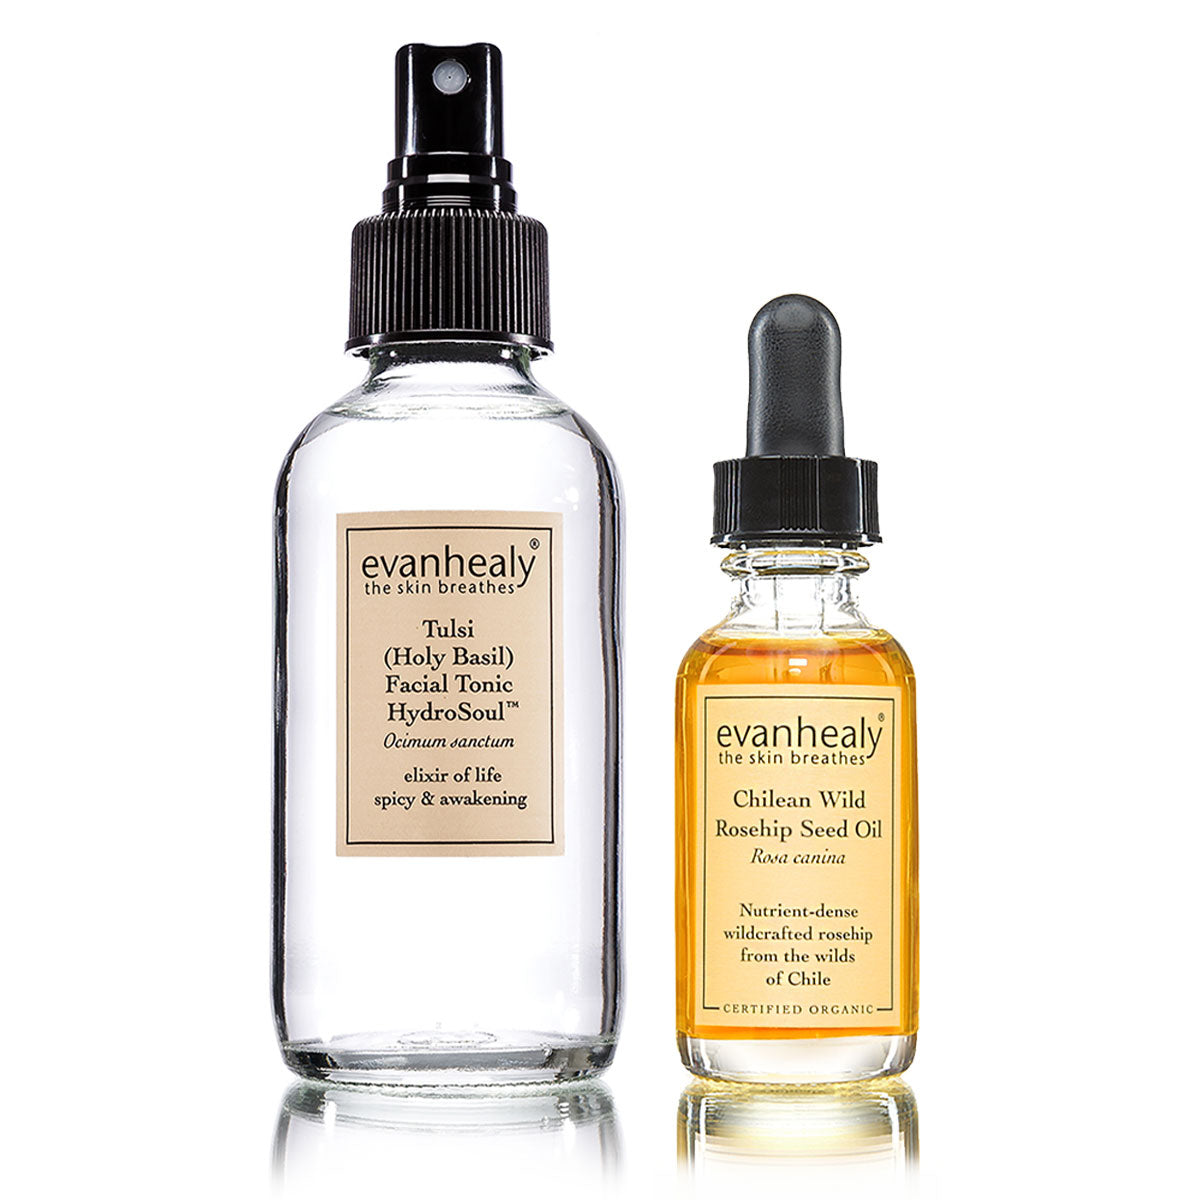 evanhealy Tulsi (Holy Basil) Facial Tonic HydroSoul and Chilean Wild Rosehip Seed Oil